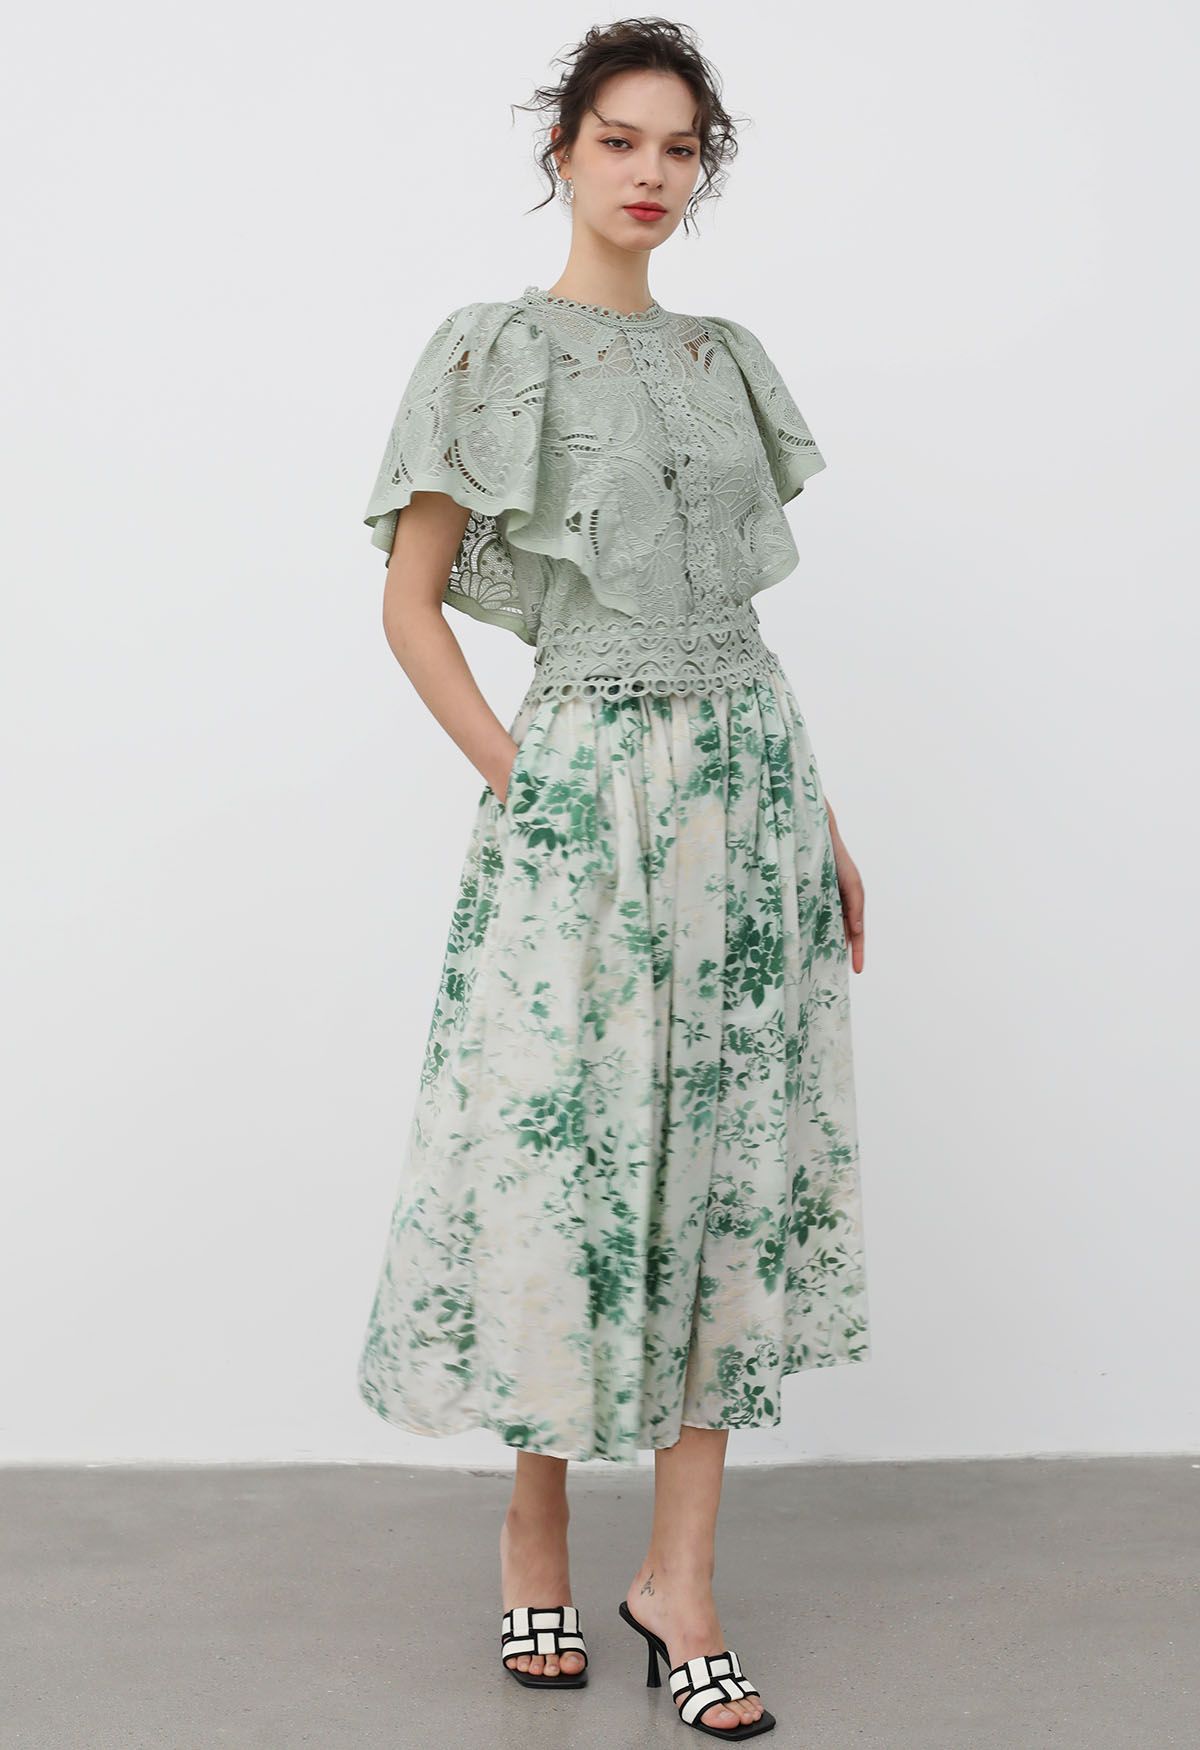 Leaves Cutwork Lace Flutter Sleeve Top in Pea Green